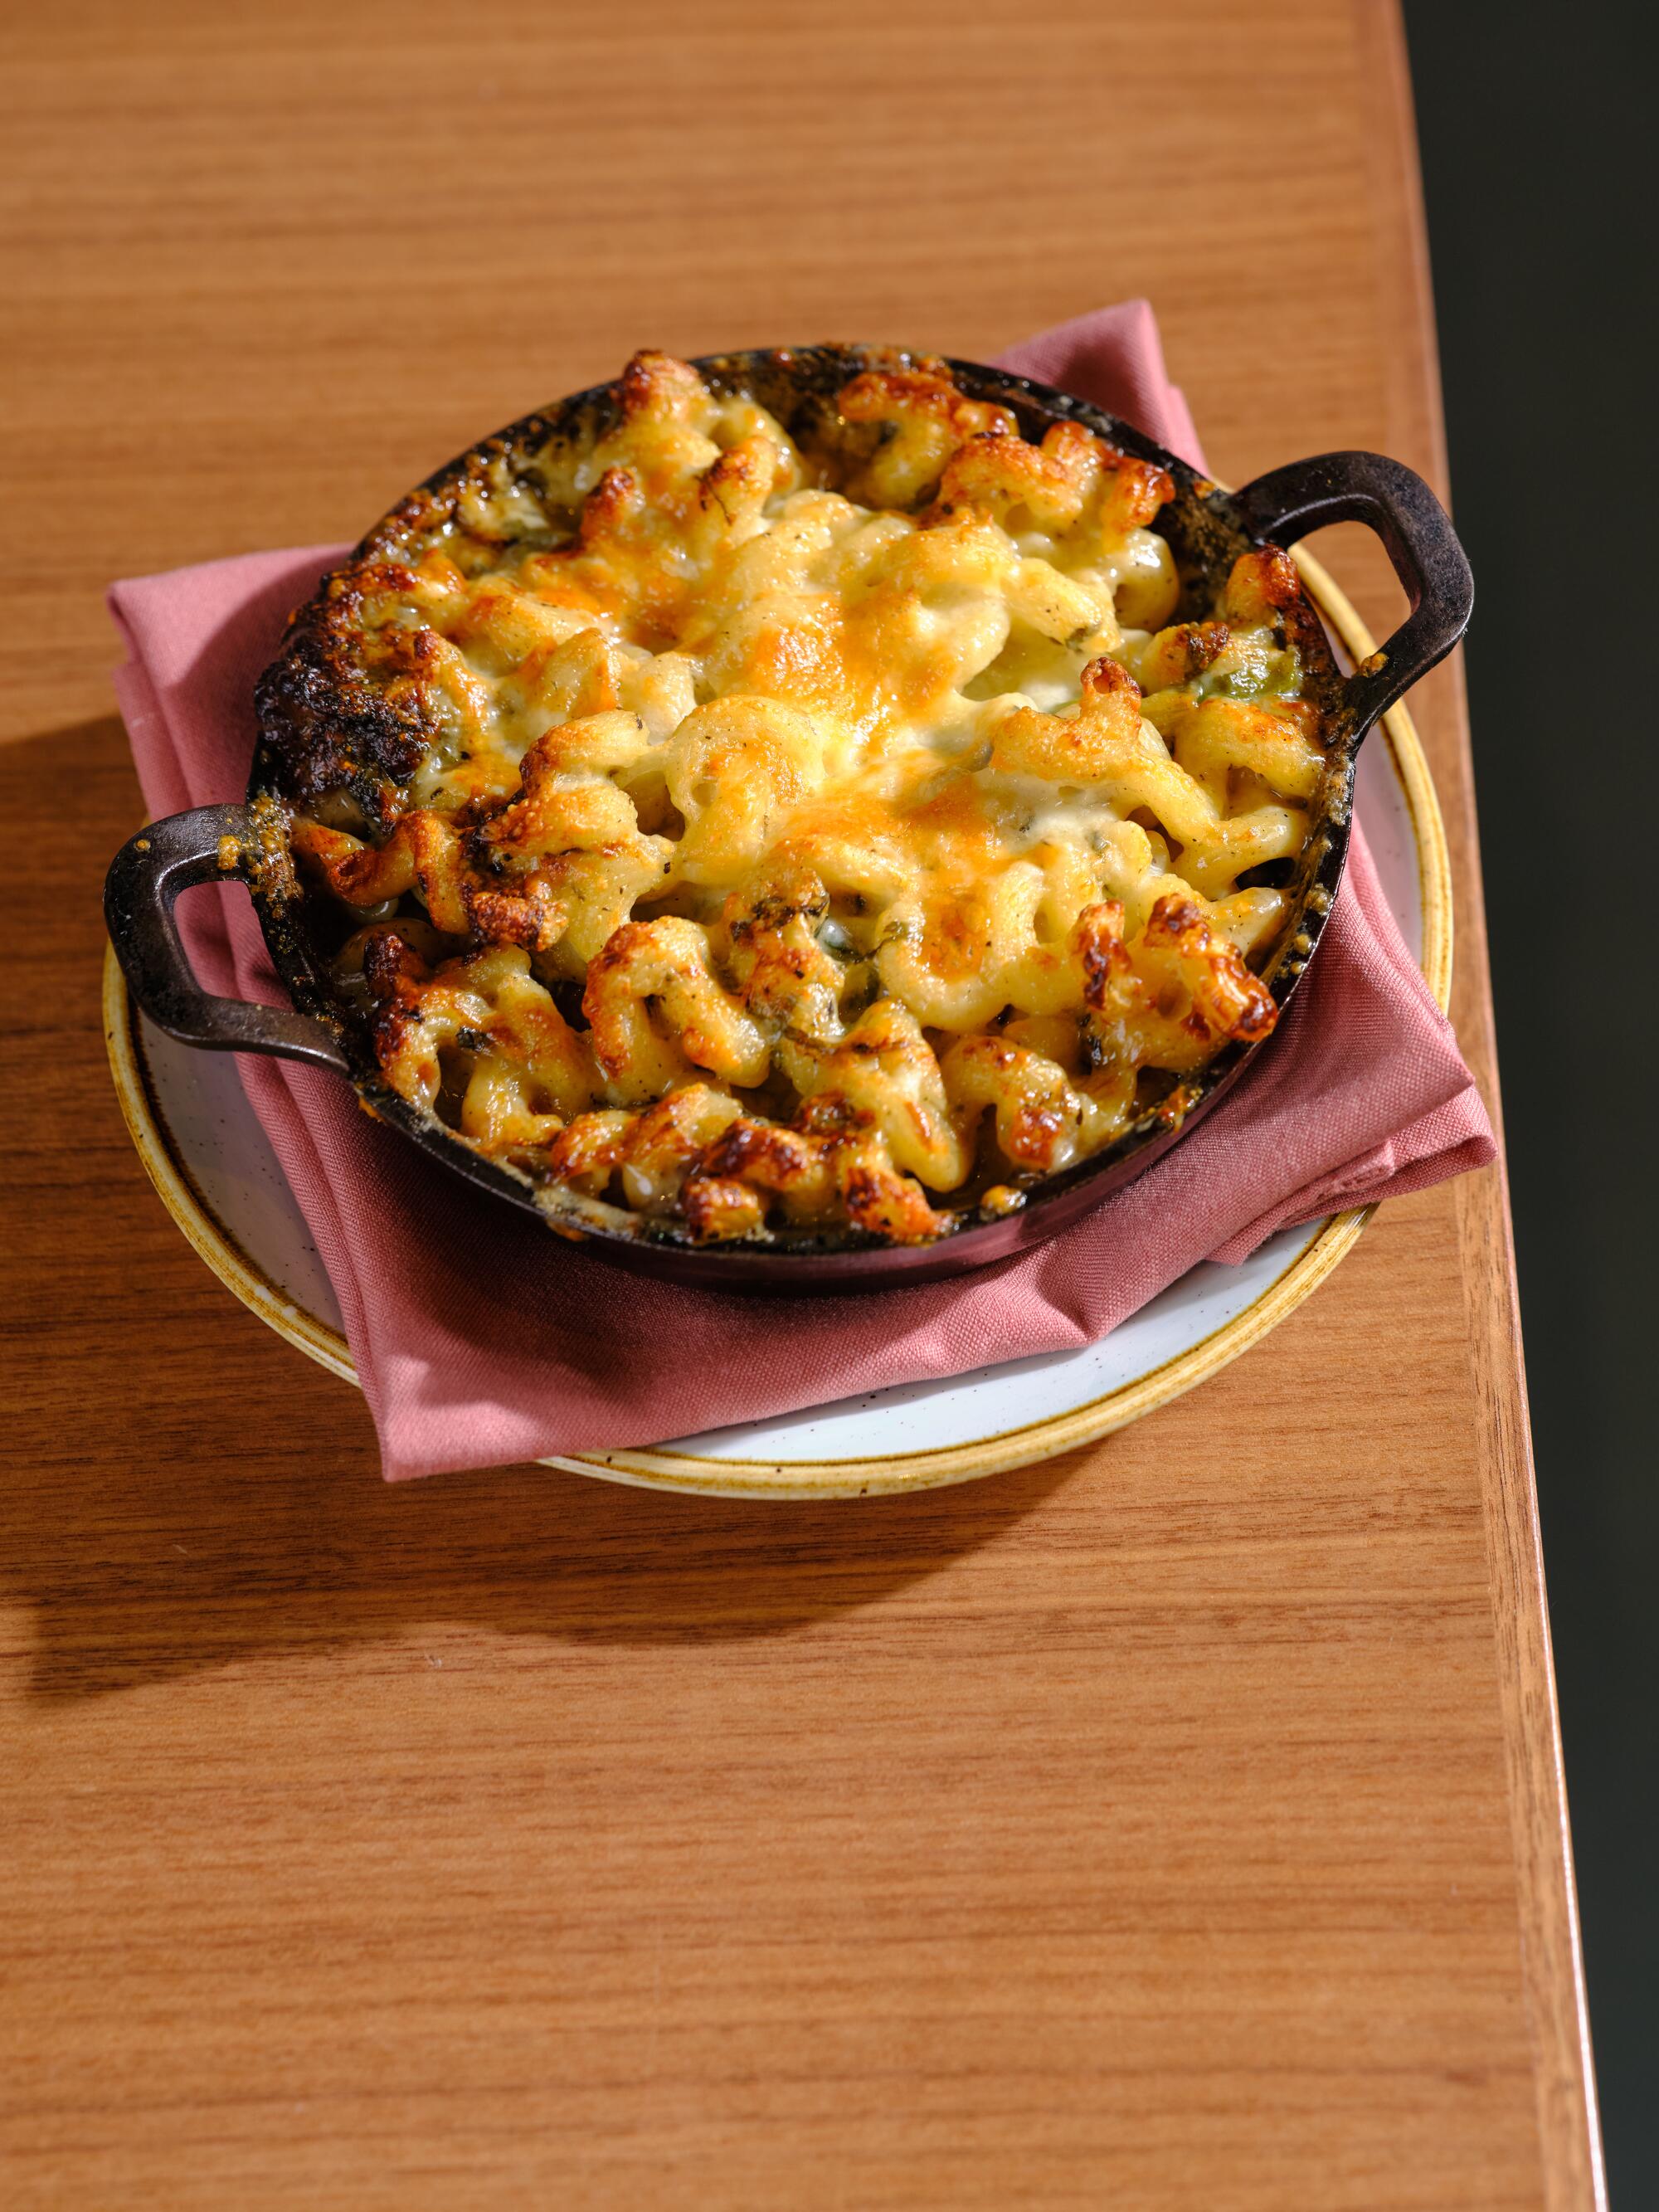 A plate of macaroni and cheese on a wooden table.